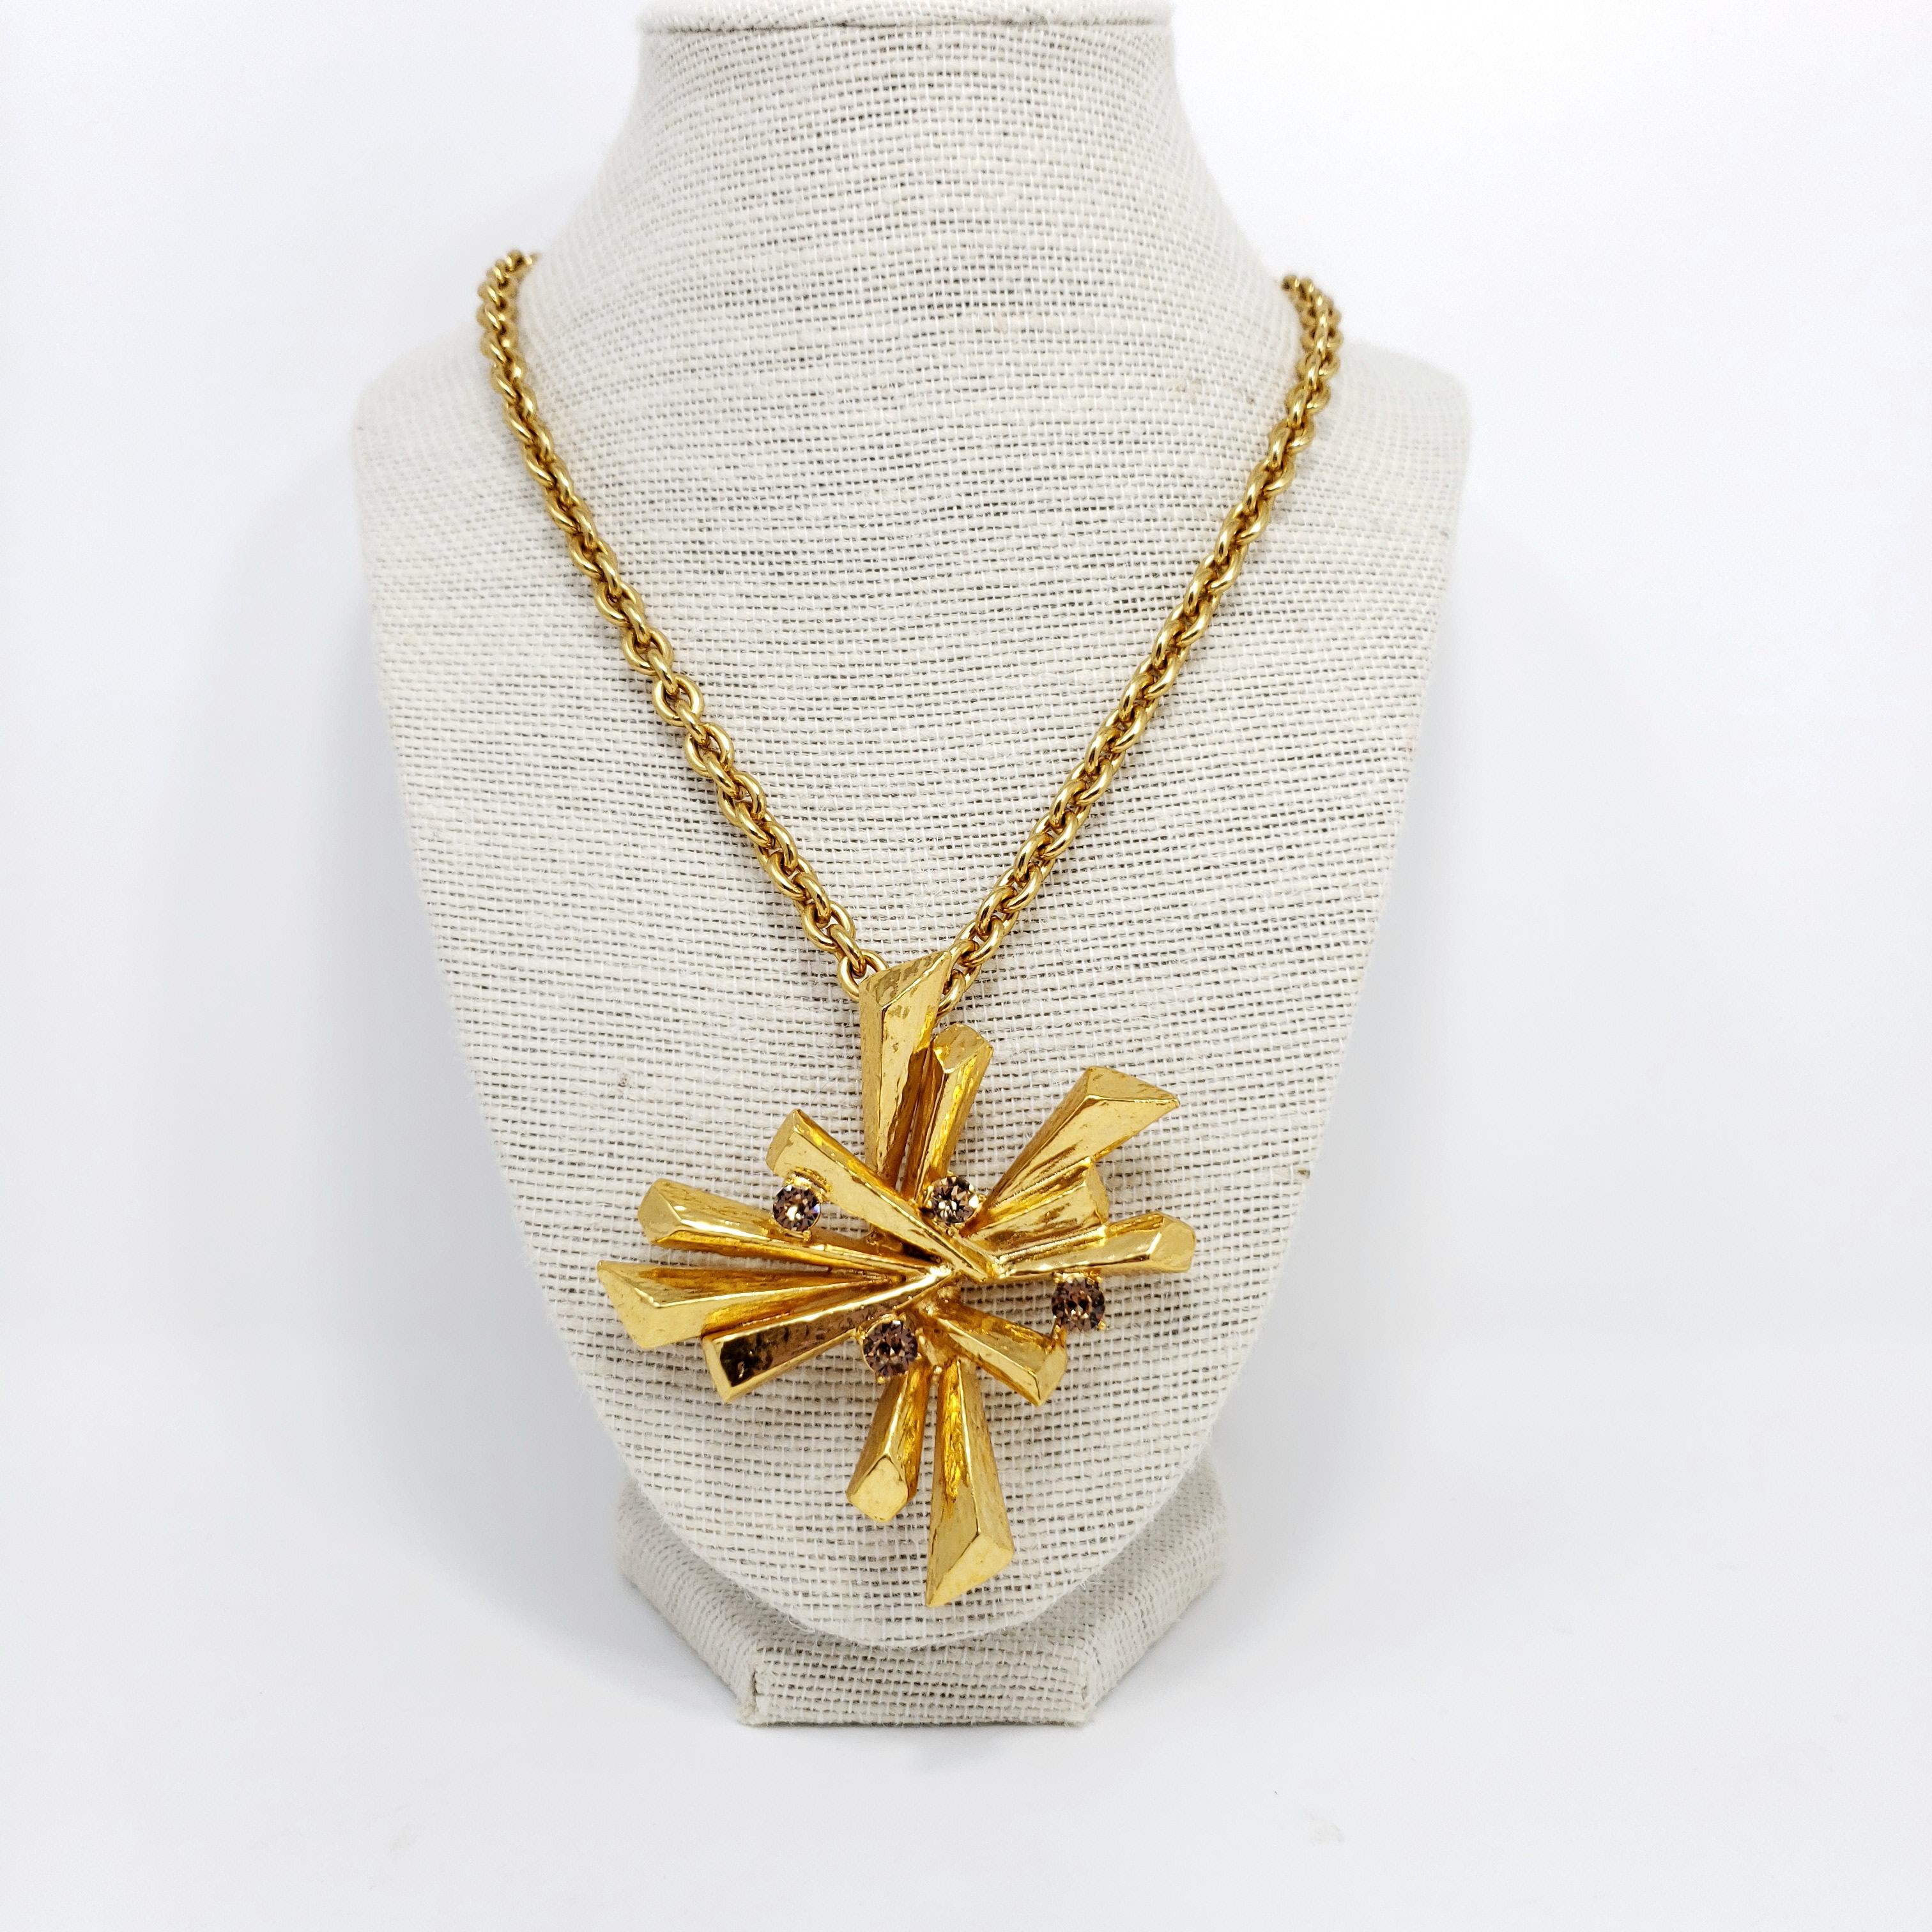 Stunning golden pendant rope necklace from Oscar de la Renta! The large abstract statement pendant is accented with topaz crystals.

Necklace is 30 inches around.

Marks: Oscar de la Renta, Made in USA